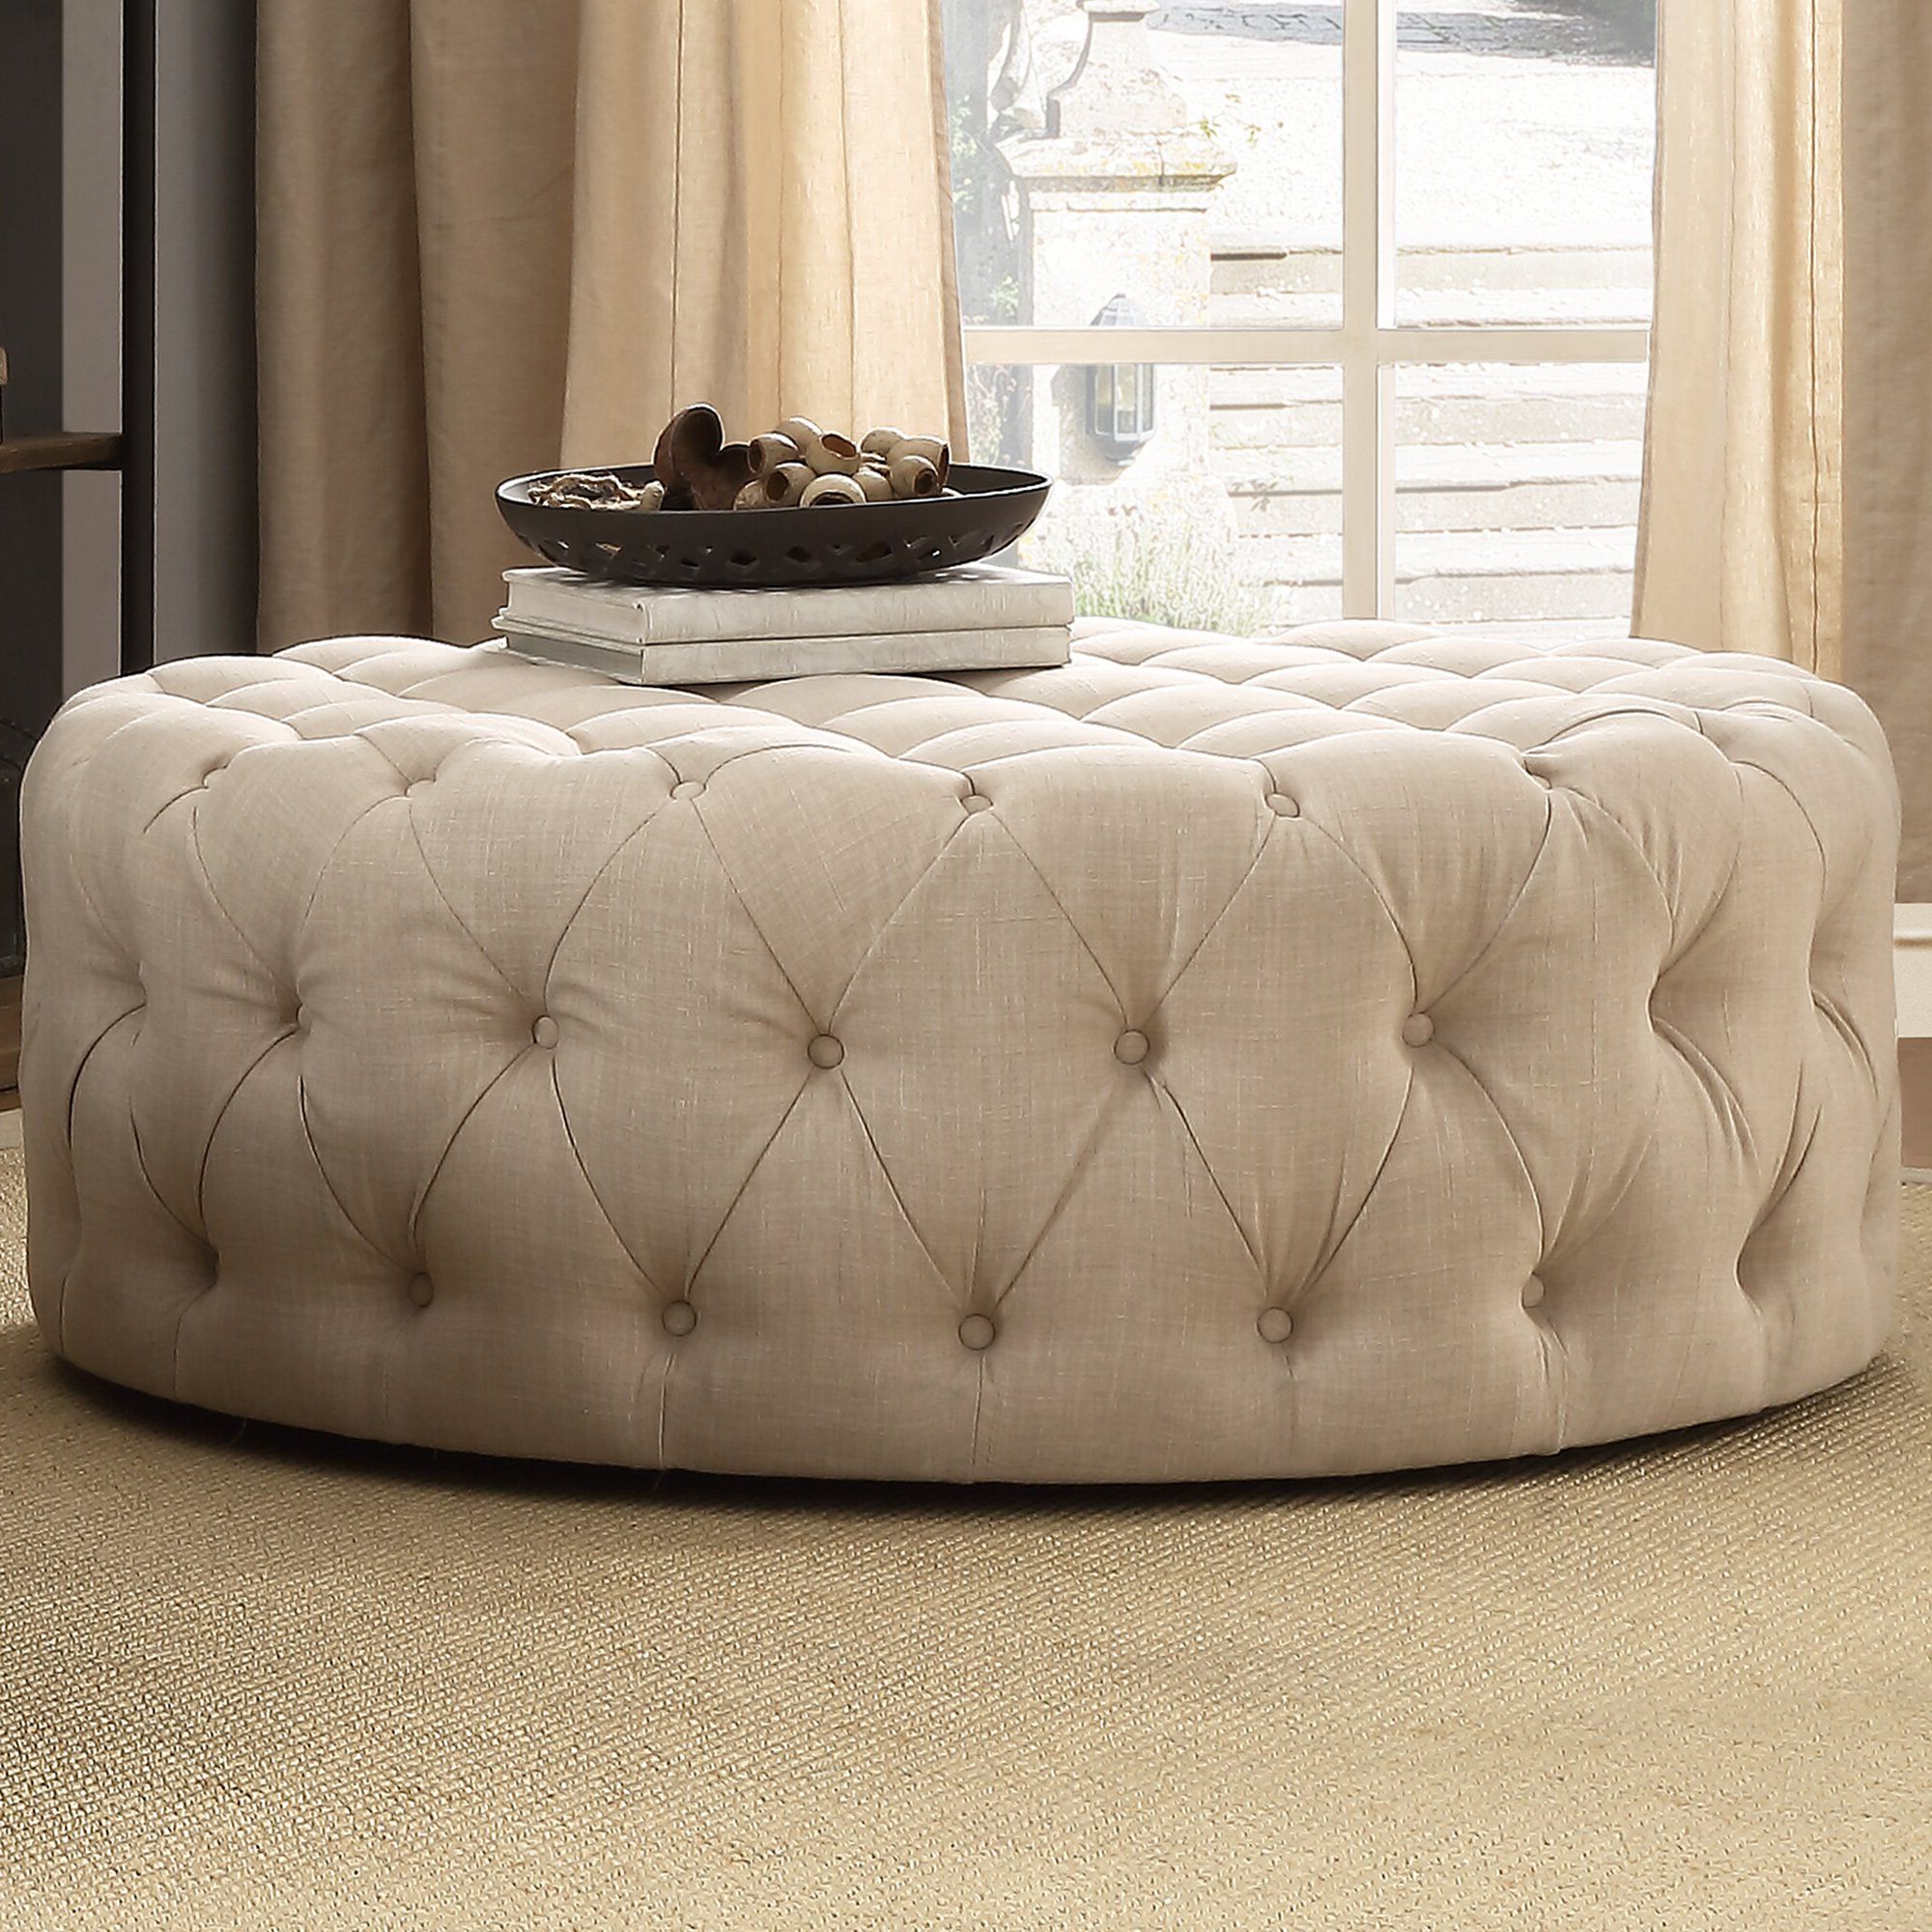 Wayfair With White Large Round Ottomans (View 8 of 10)